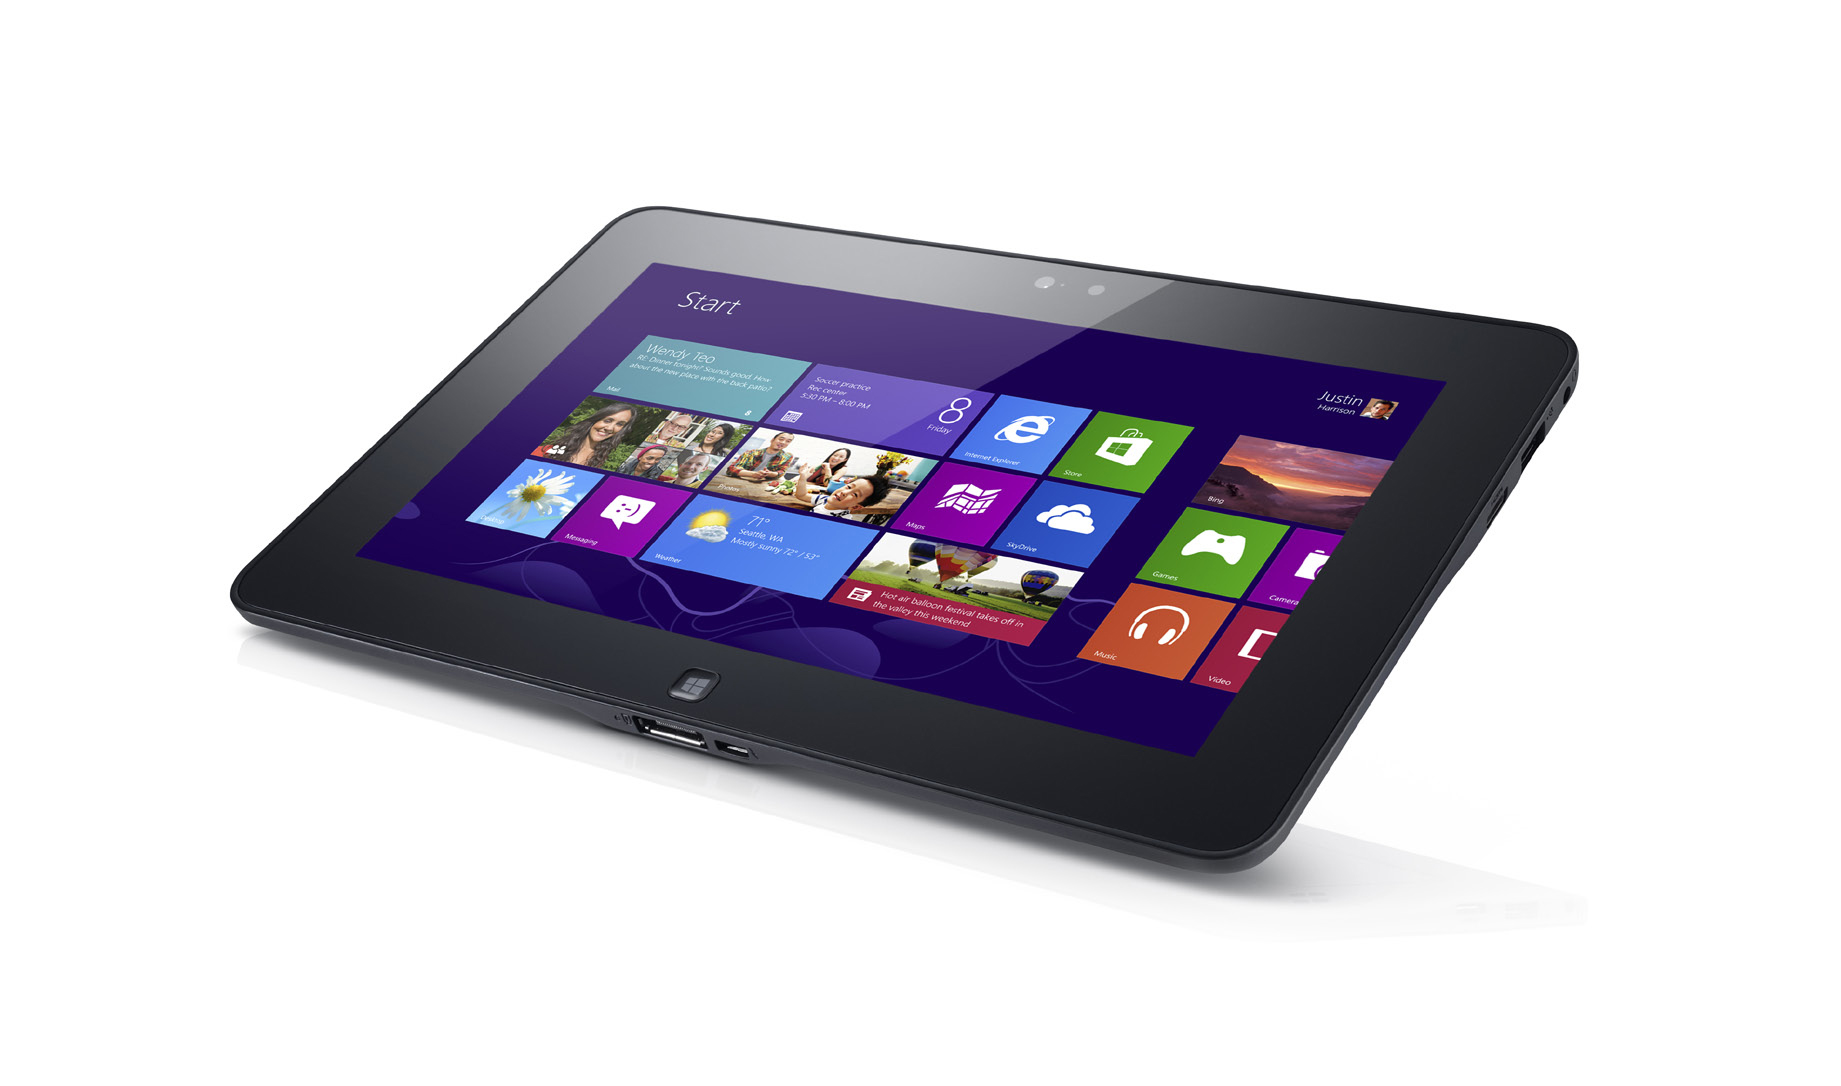 the dell latitude 10 is a 10 inch tablet that is intended for